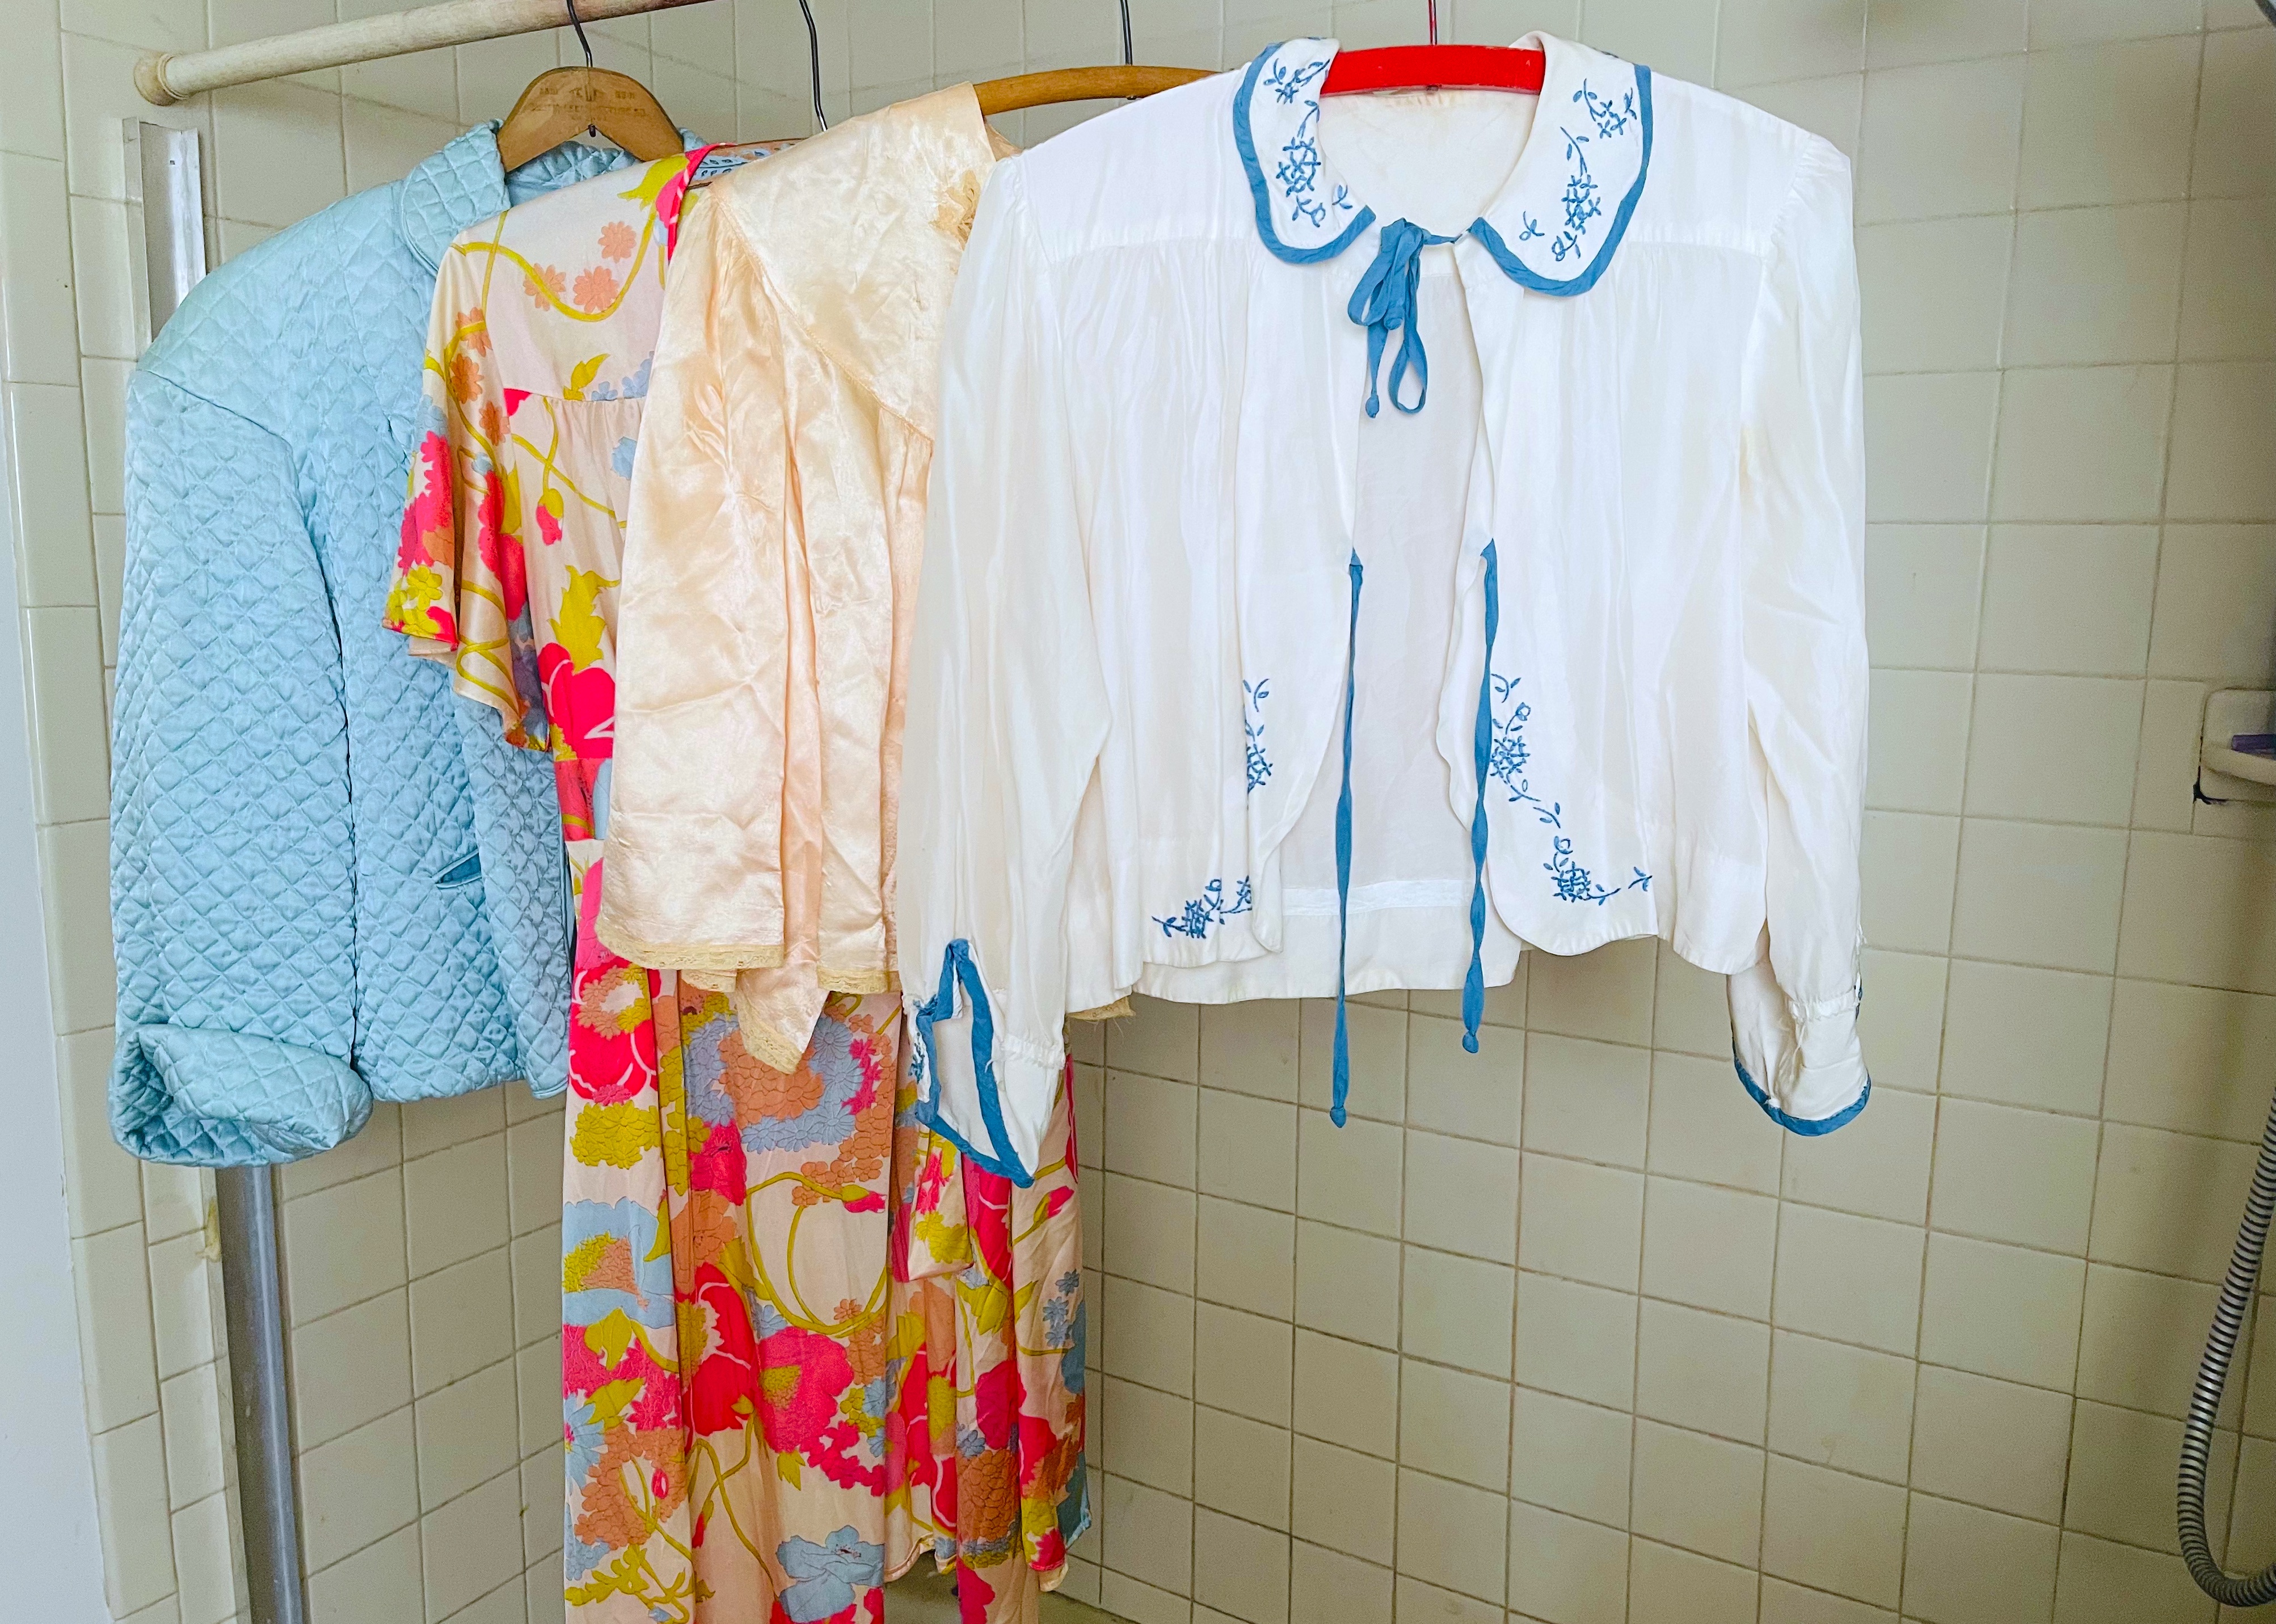 Collecting and Caring for Vintage Clothing